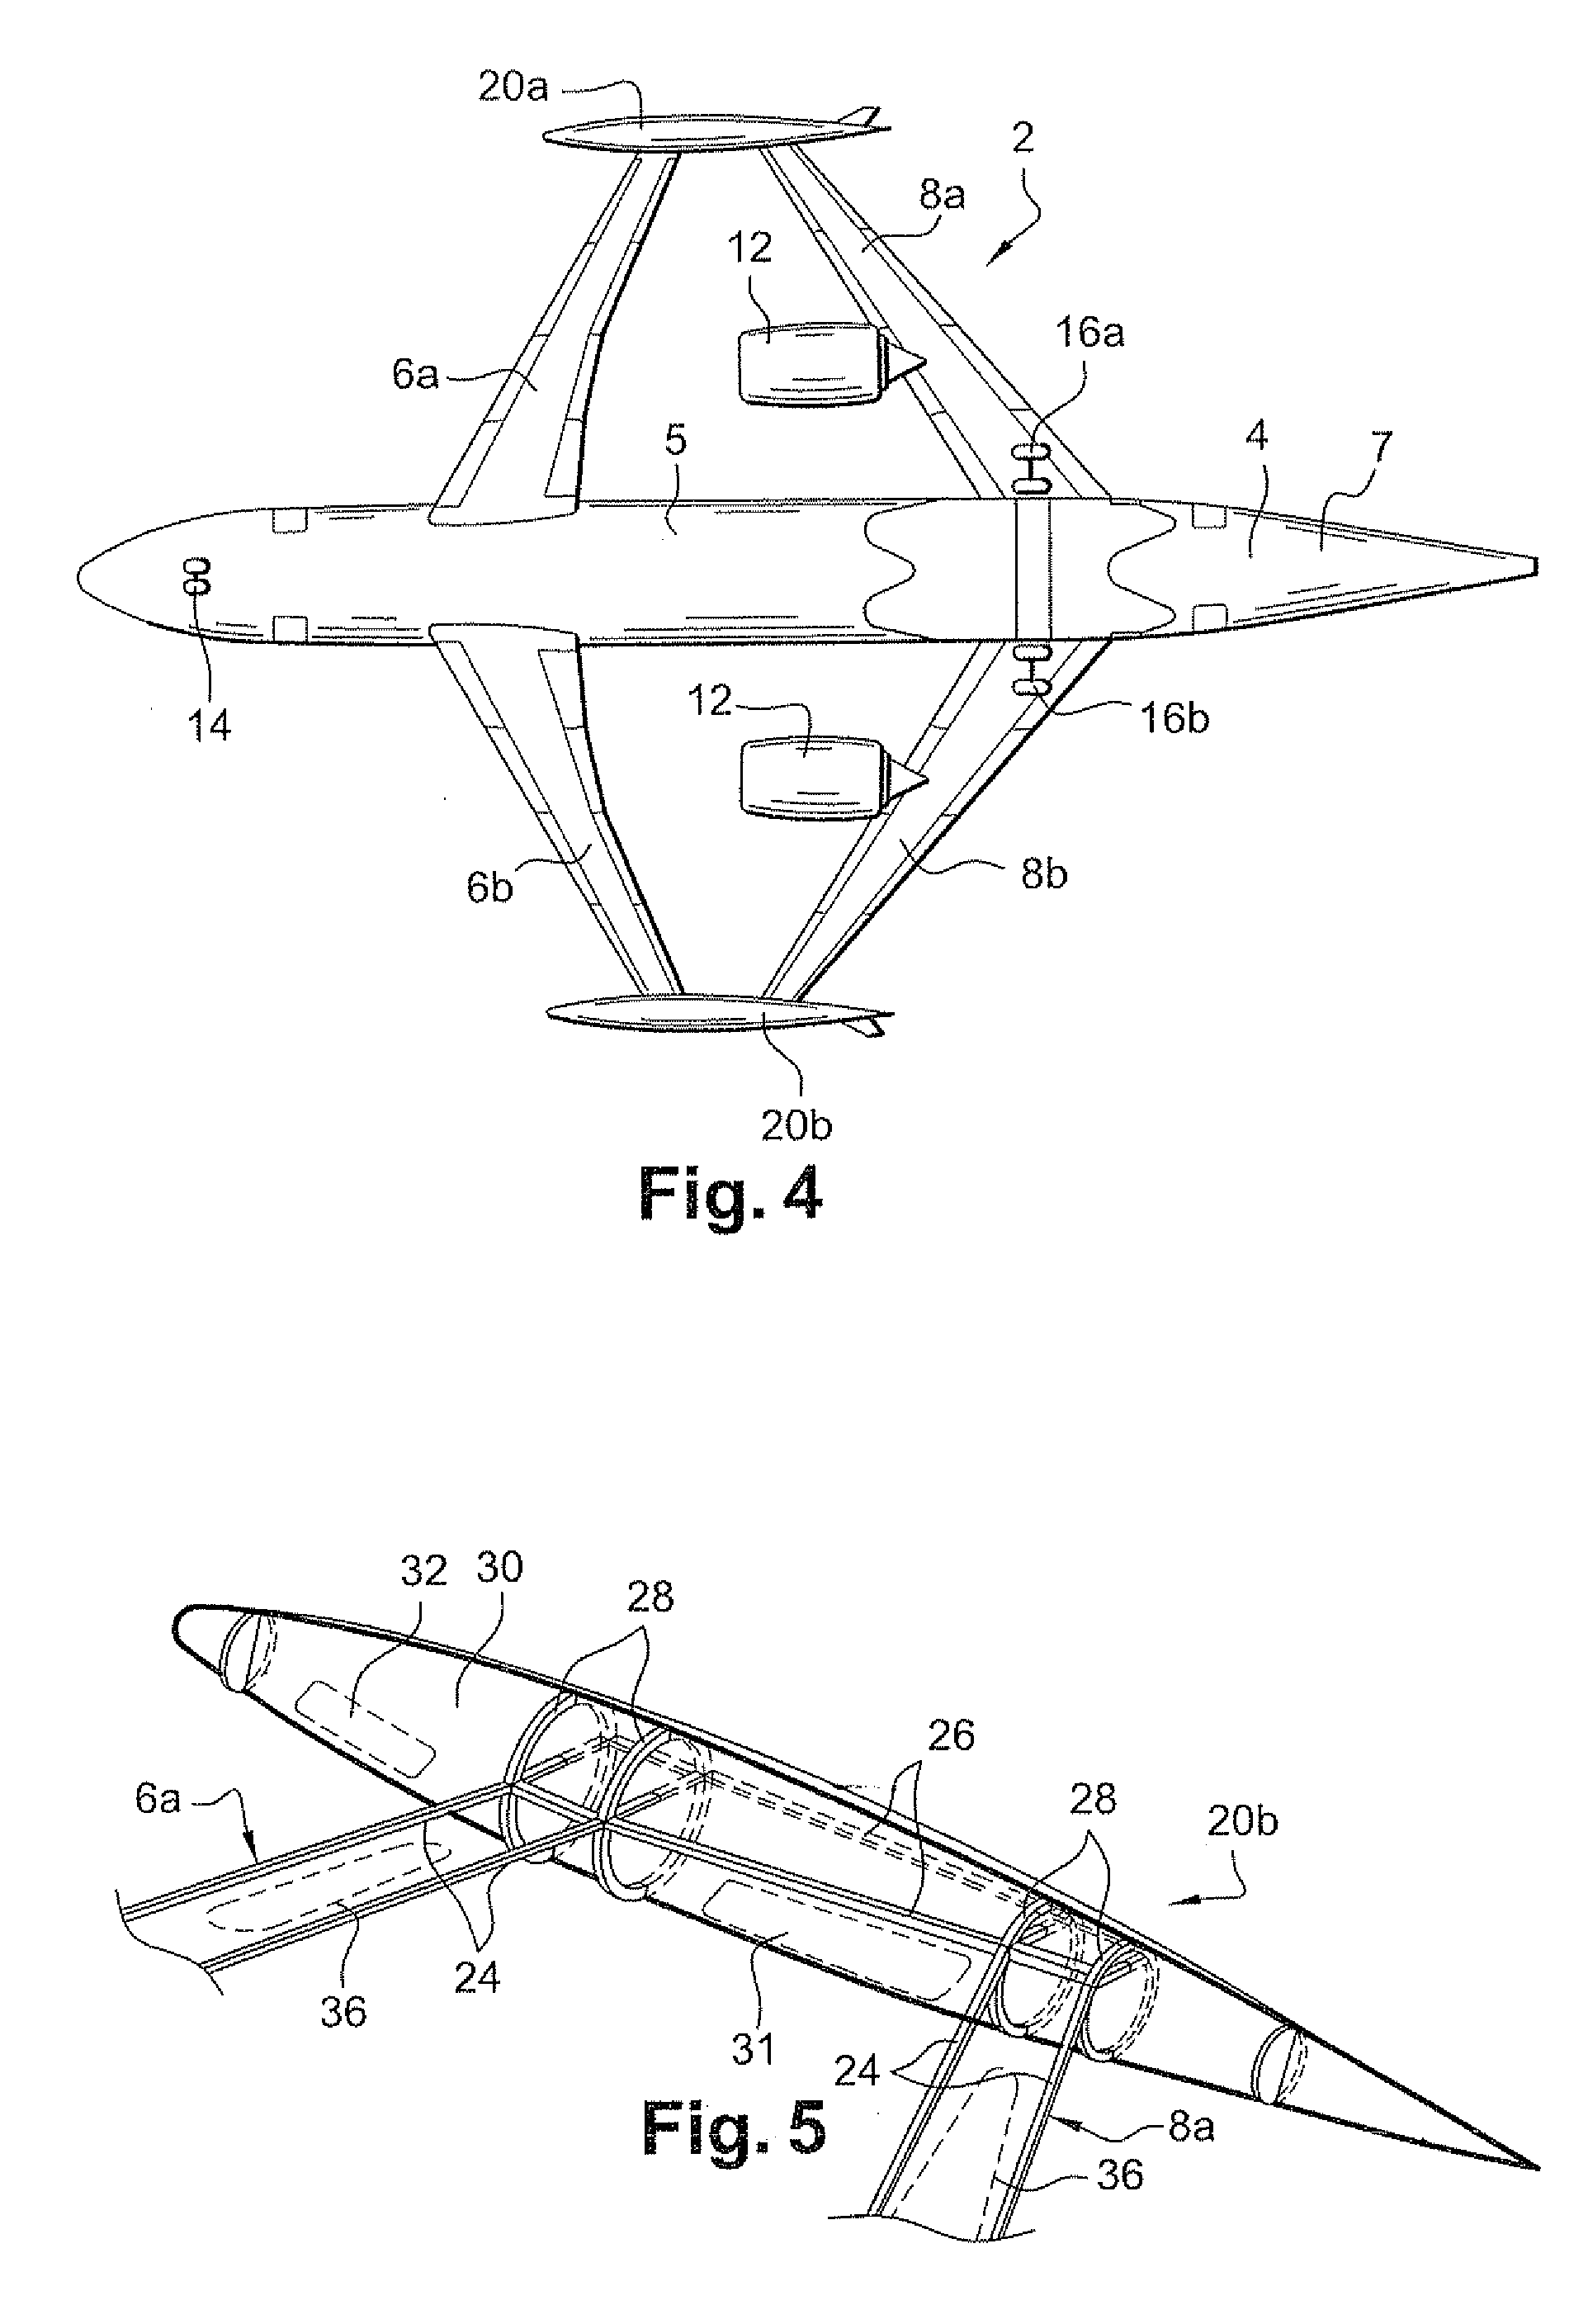 Aircraft presenting two pairs of wings